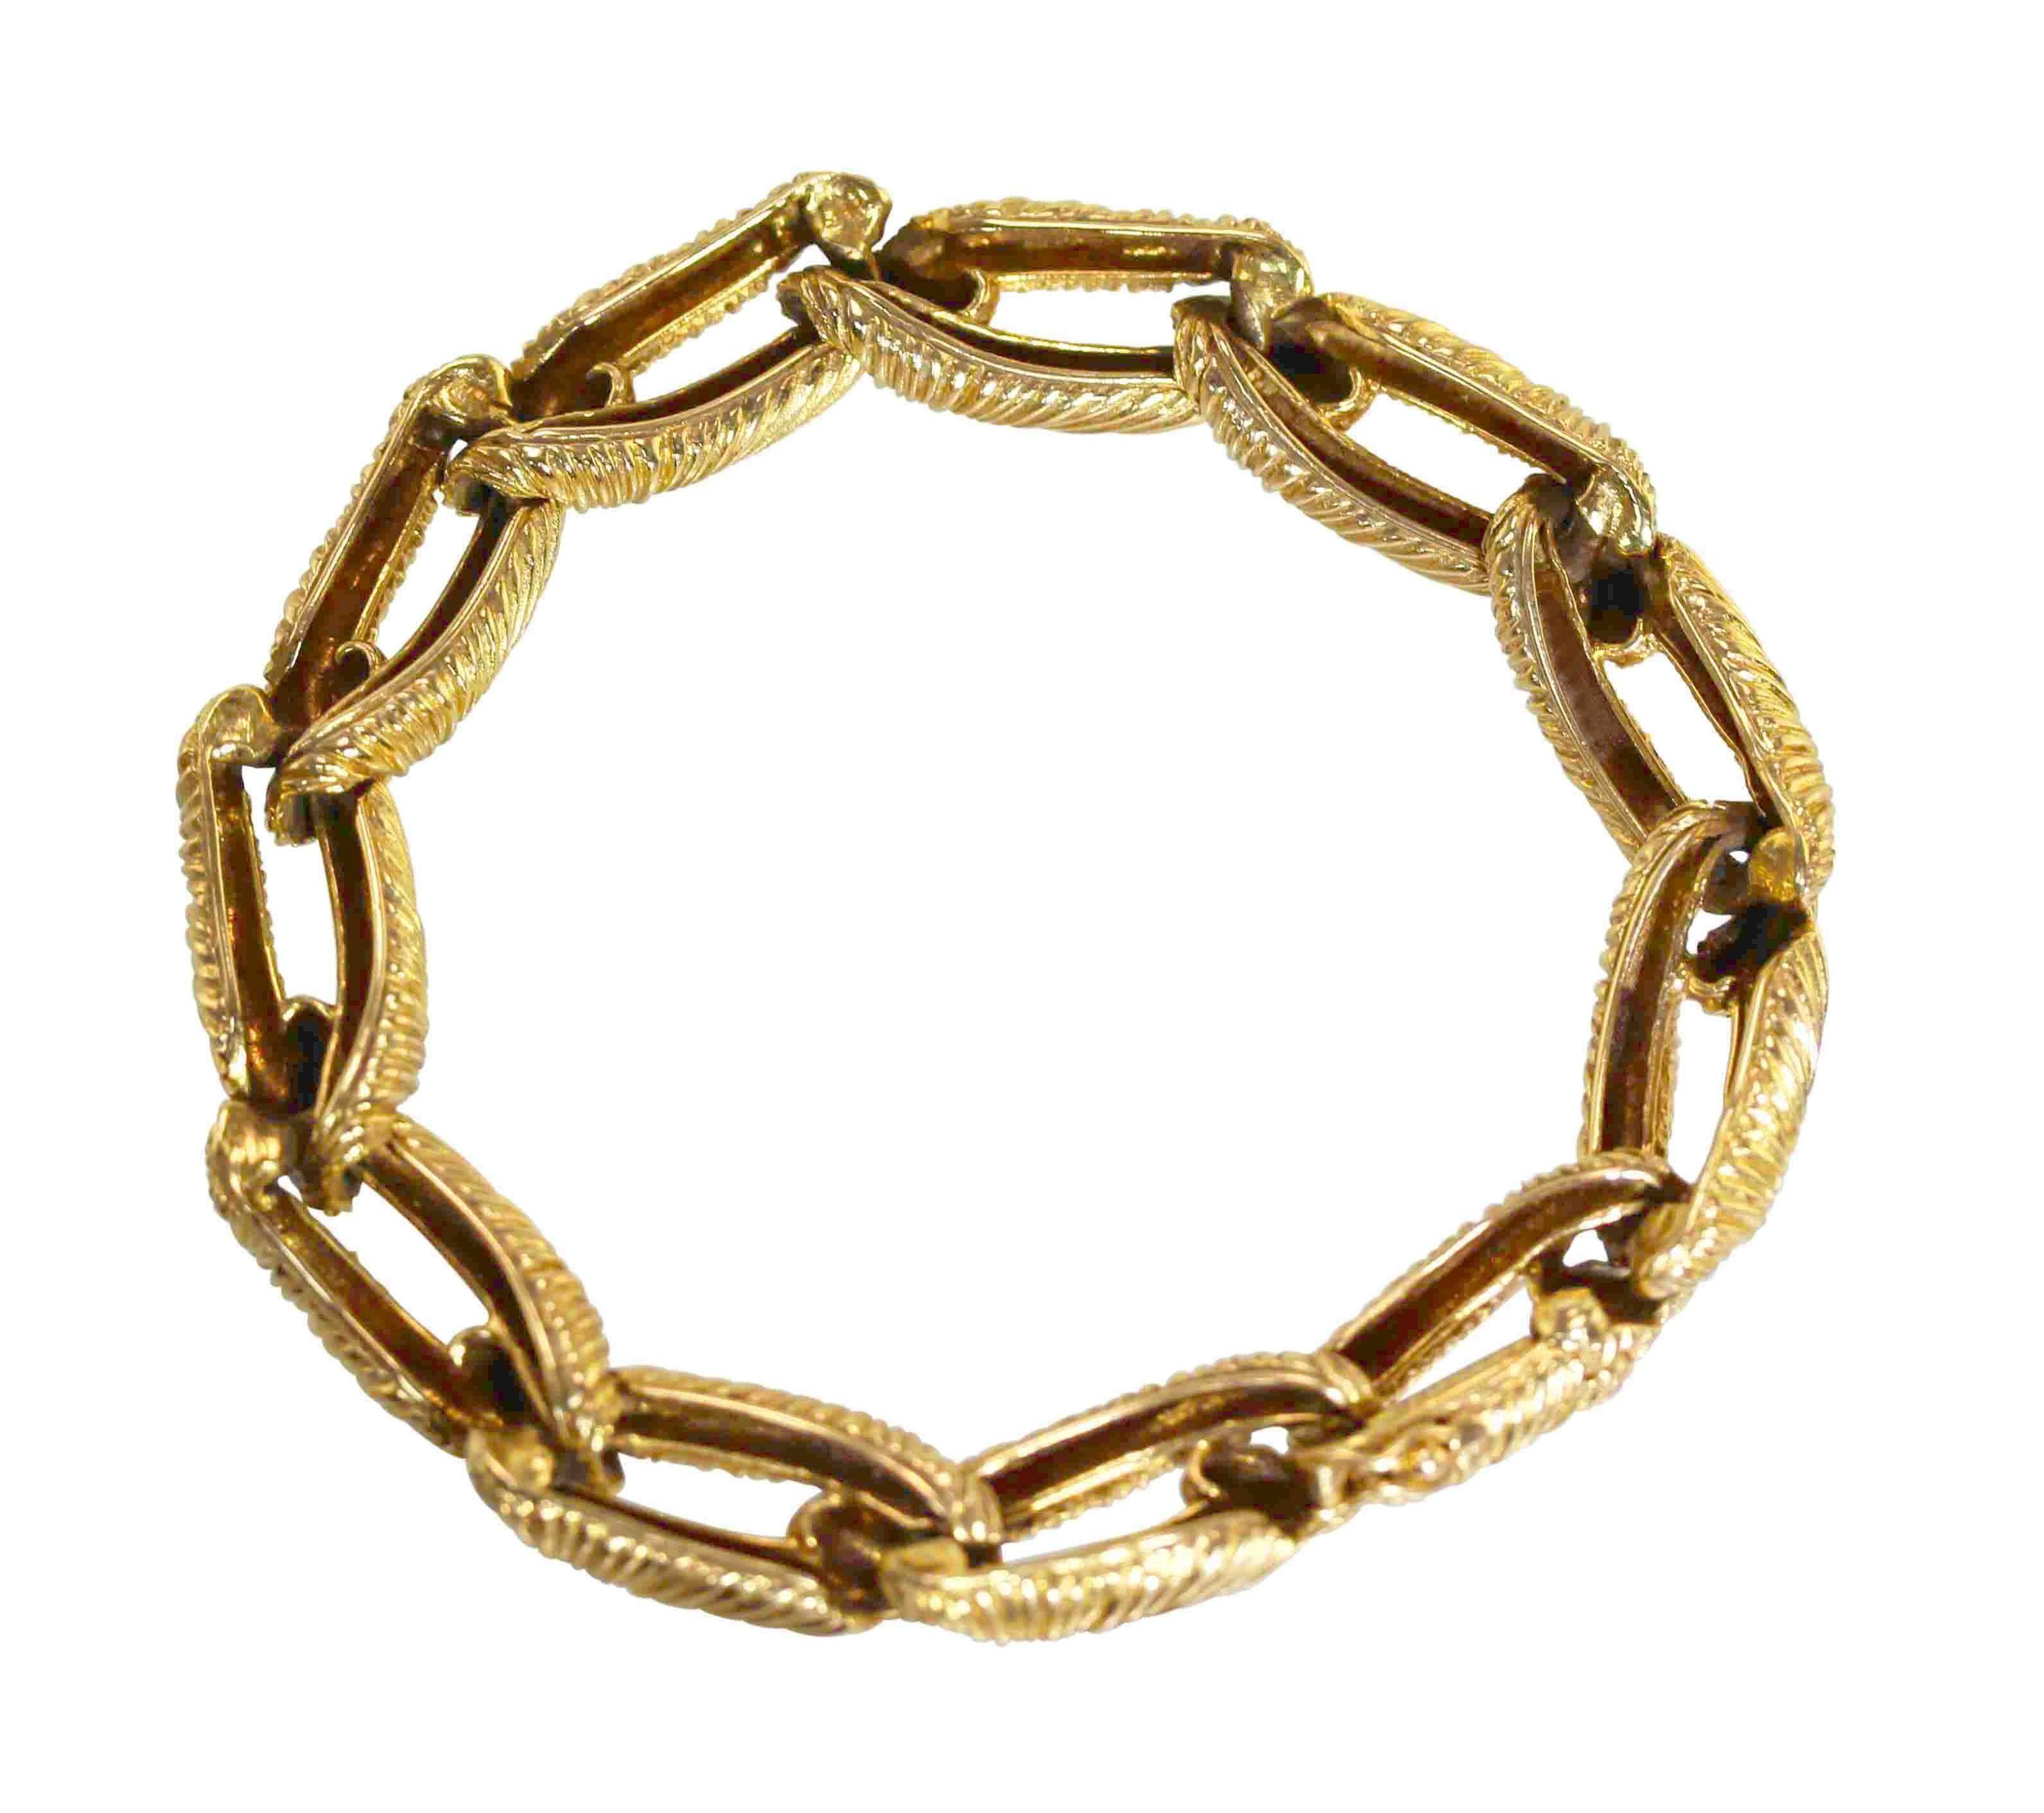 An 18 karat gold link bracelet by Cartier, Paris, circa 1970, composed of eleven textured gold links, measuring 7 1/2 by 3/8 inches, gross weight 47.3 grams, signed Cartier Paris, with French assay and workshop marks.  